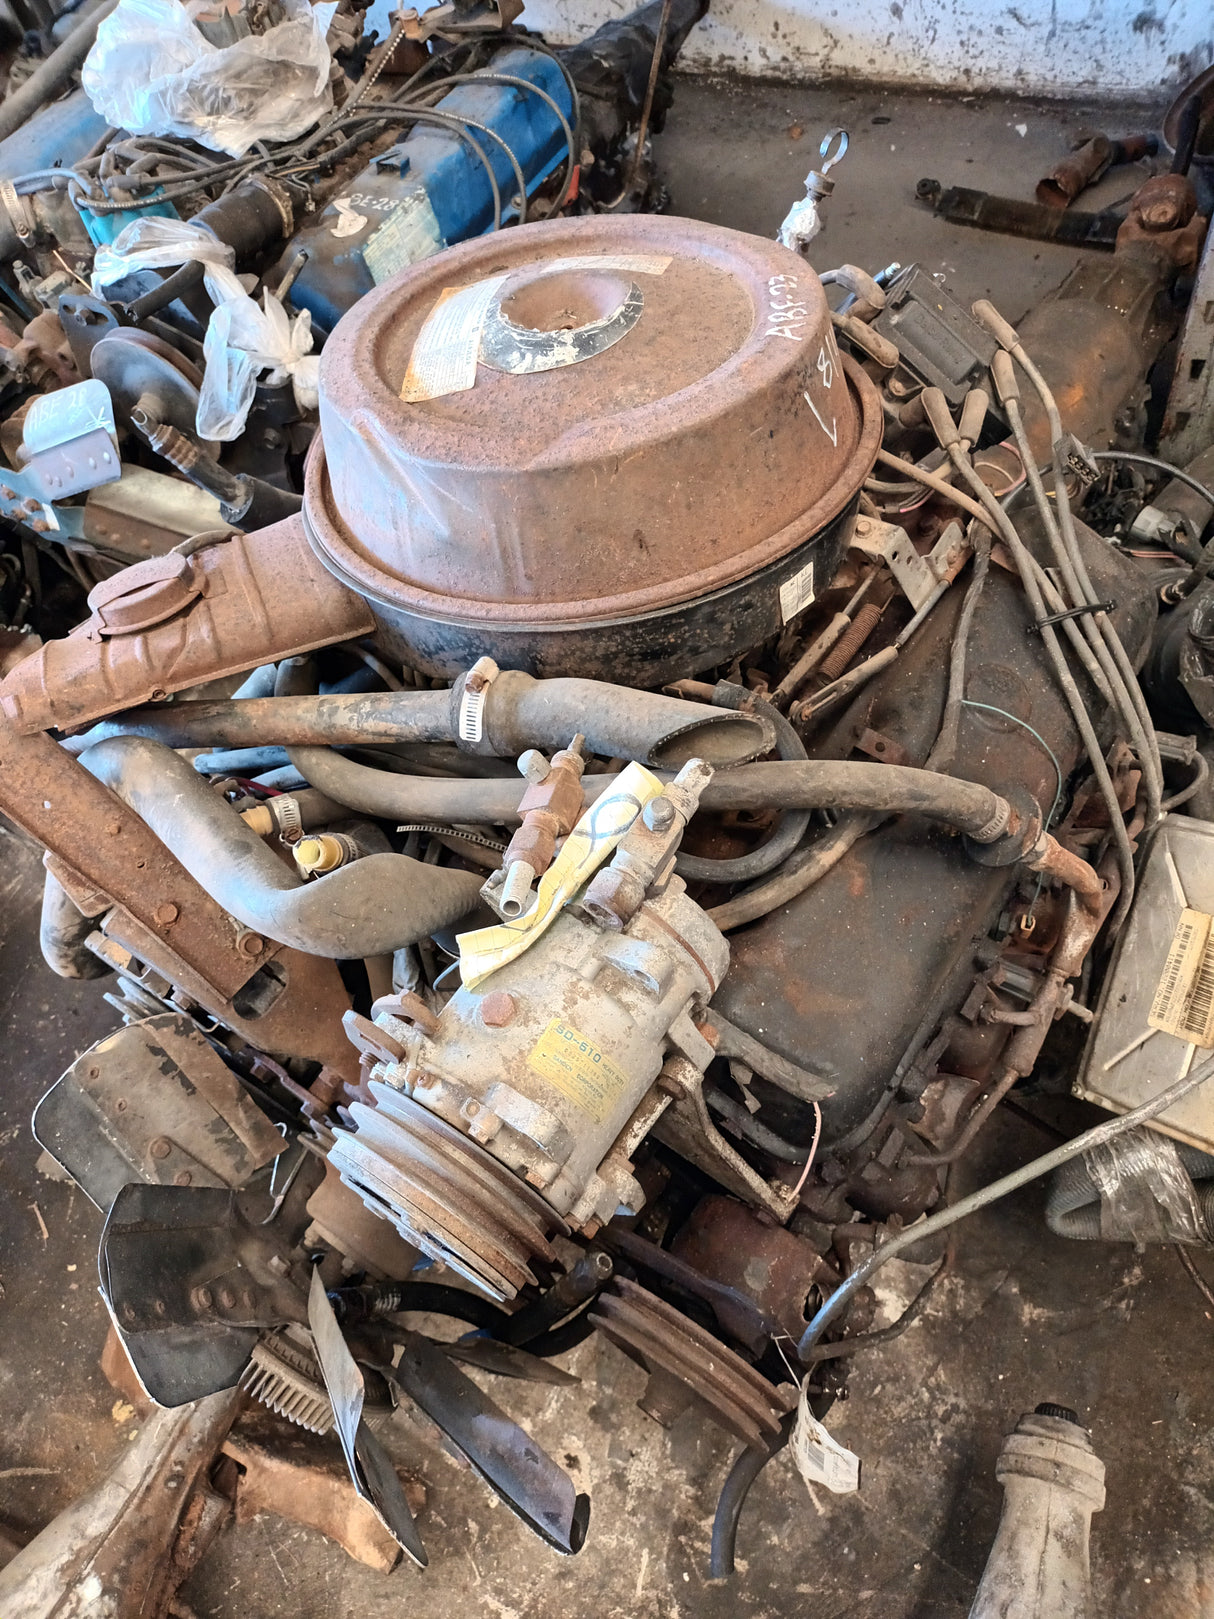 ENGINE CHEV 454 BB USED CONDITION GOOD FOR REBUILDING